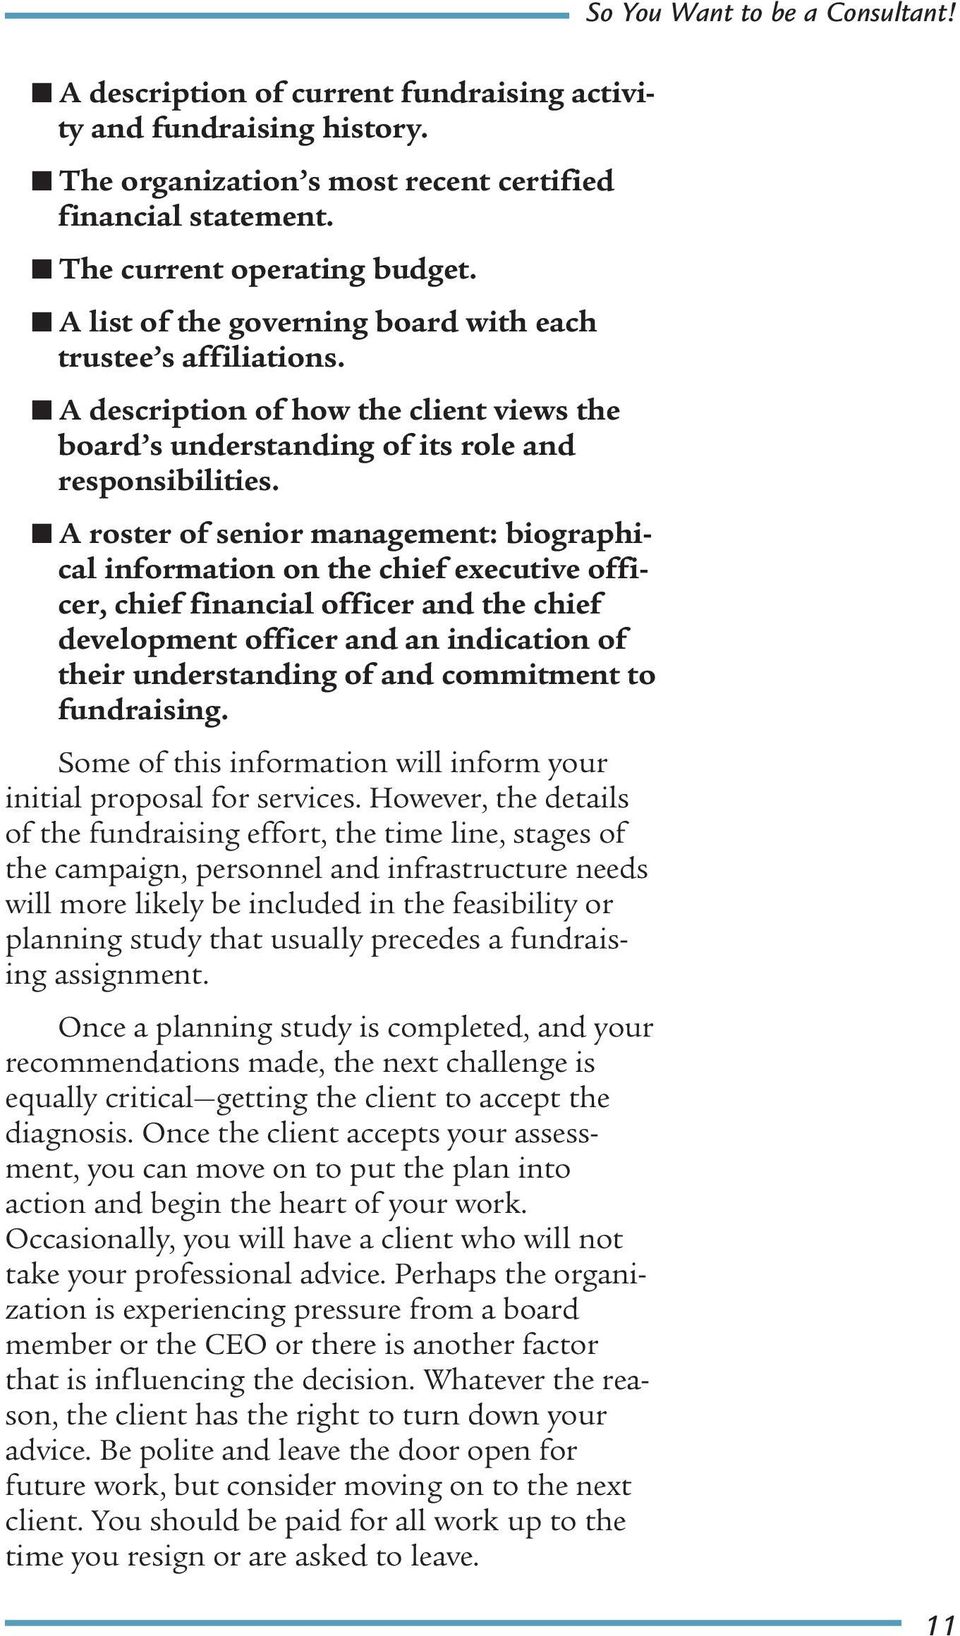 A roster of senior management: biographical information on the chief executive officer, chief financial officer and the chief development officer and an indication of their understanding of and